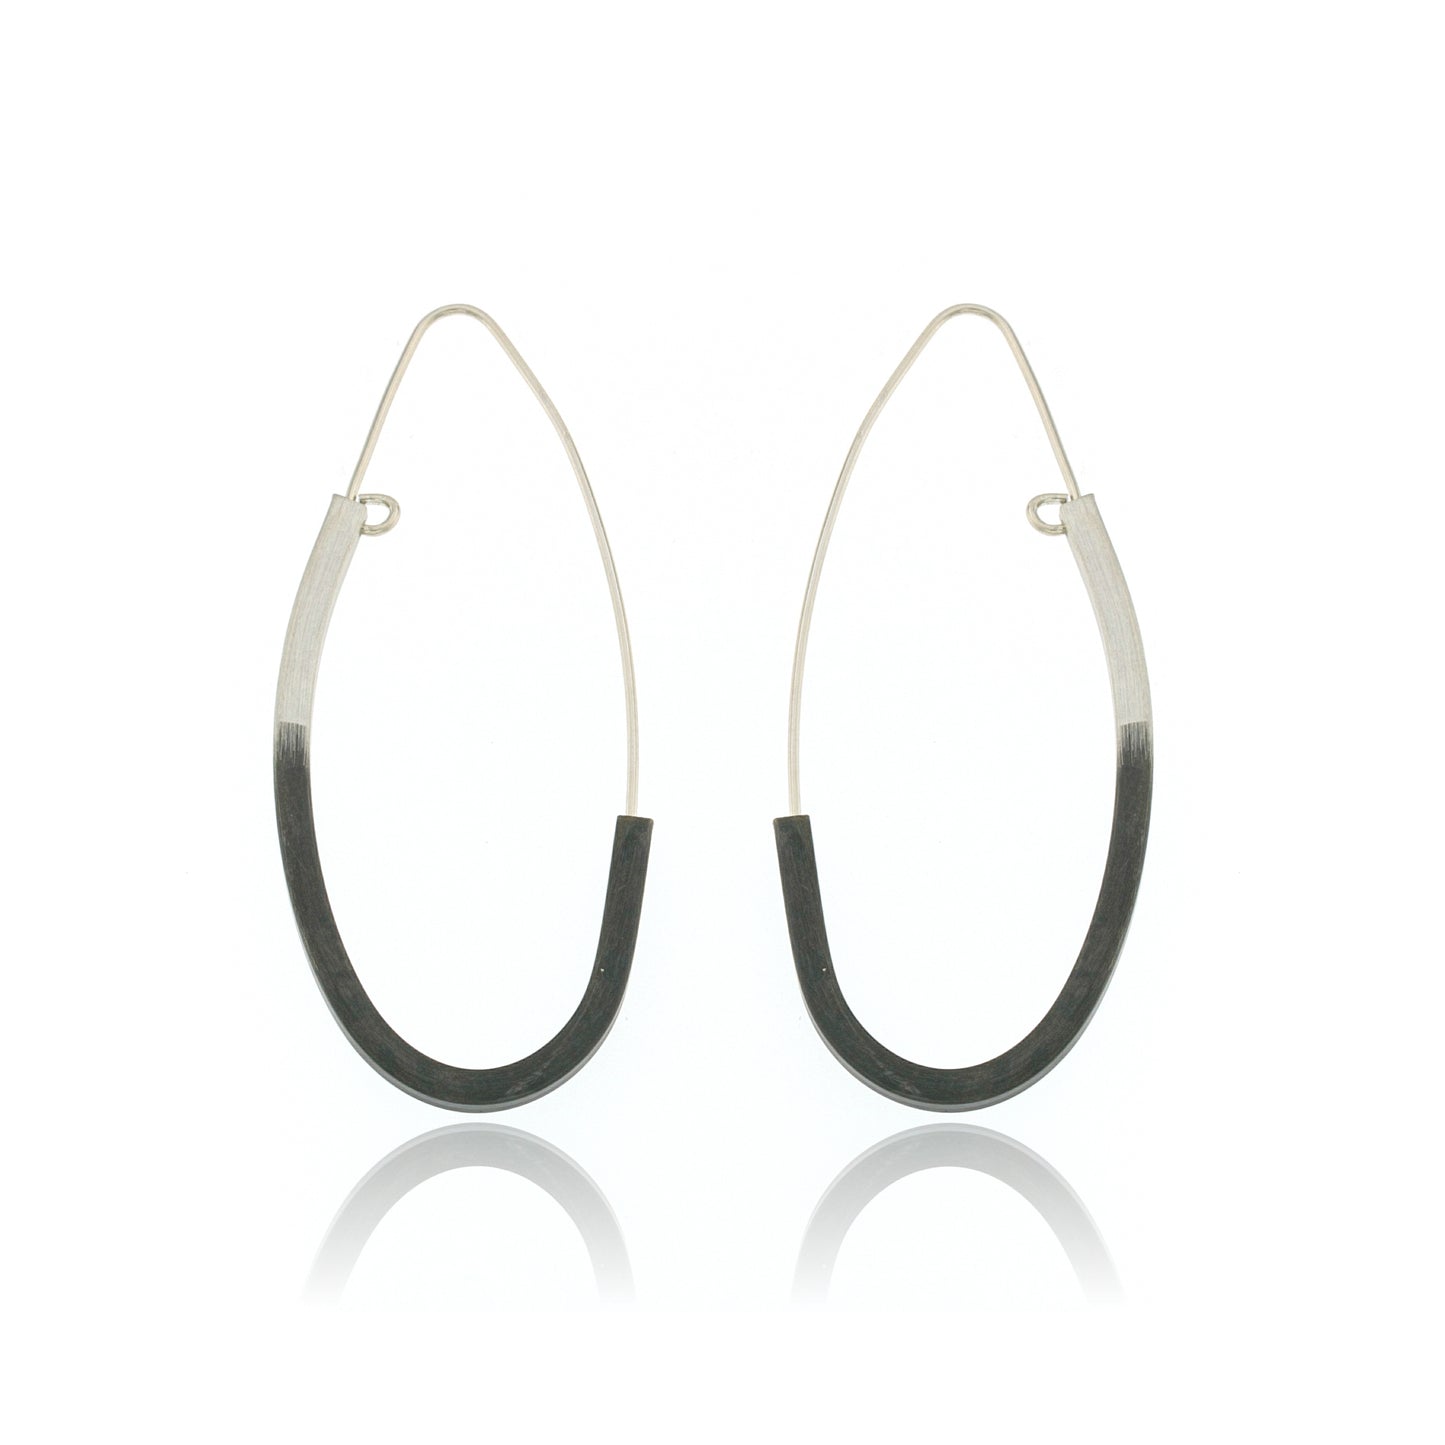 Mysterium Collection "Shaded Curve"  Earrings